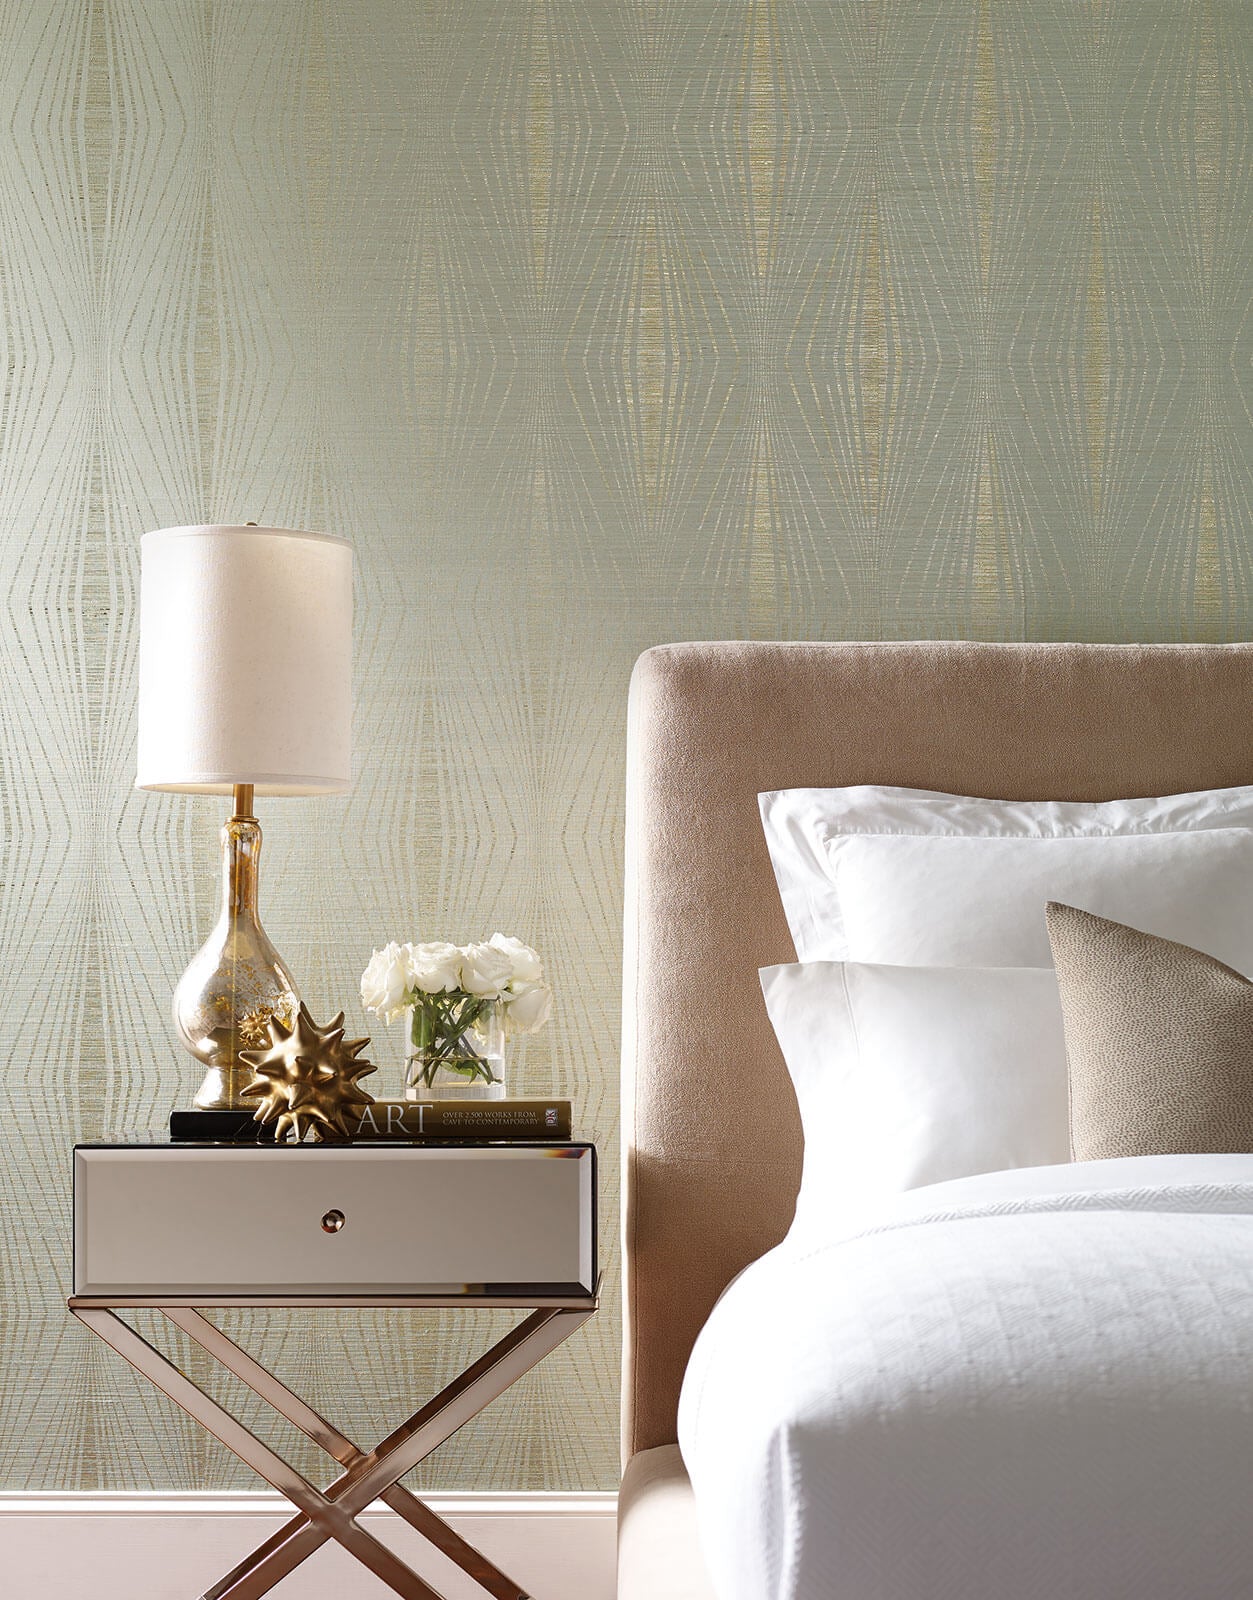 DL2933 Candice Olson Radiant Wallpaper Gold Spa